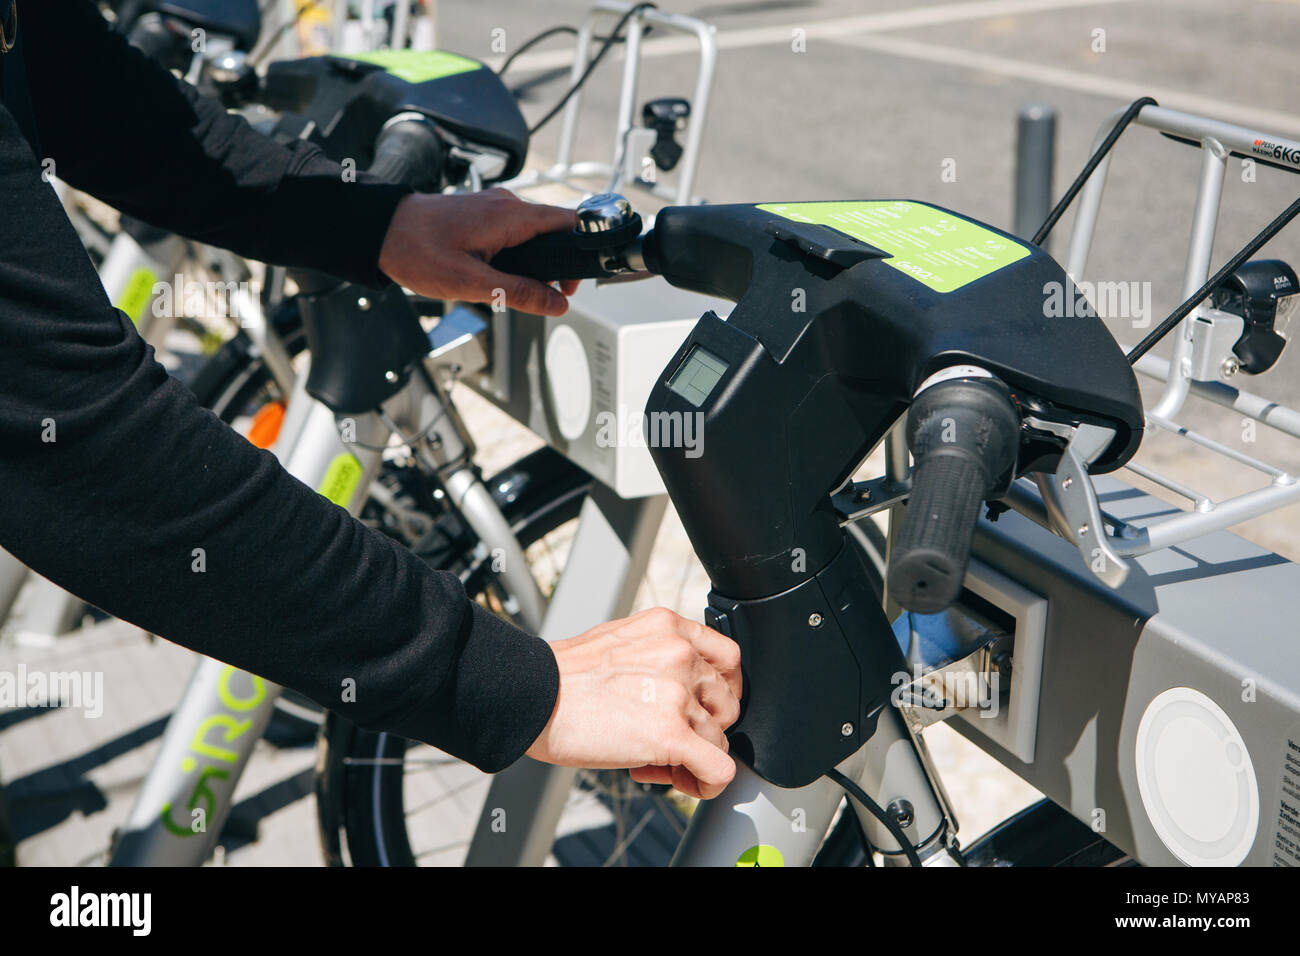 Portugal, Lisbon 29 april 2018: city bicycles or alternative ecological public transport and lease of city bicycle. A person takes a bicycle for rent Stock Photo